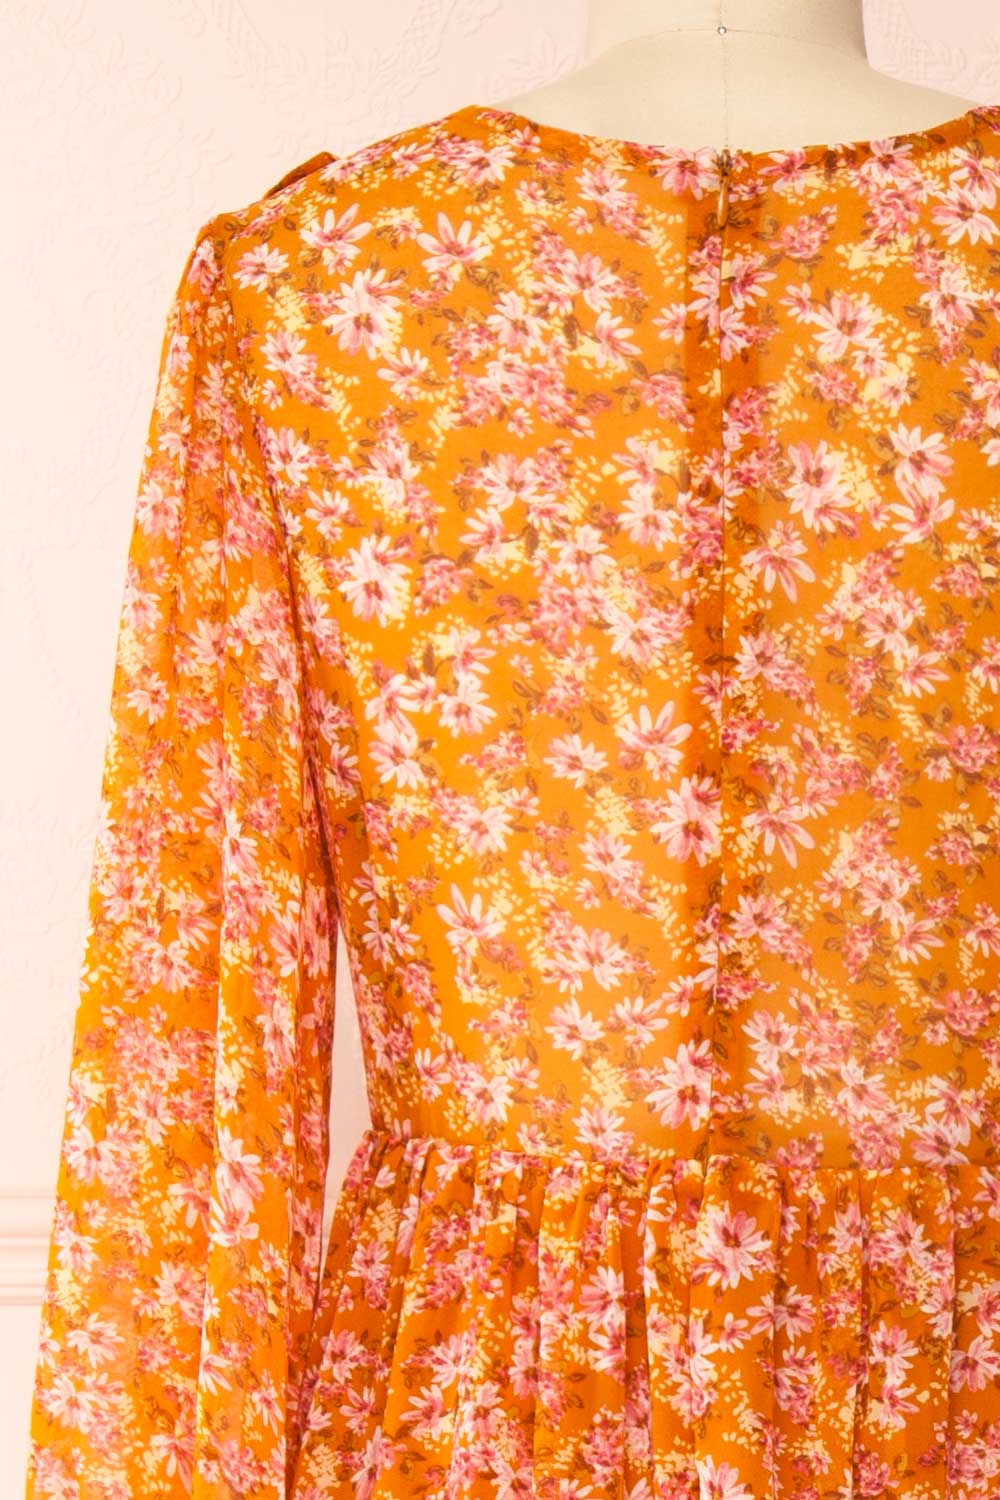 Normandine Floral Midi Dress w/ Long Sleeves and Lace | Boutique 1861 back close-up